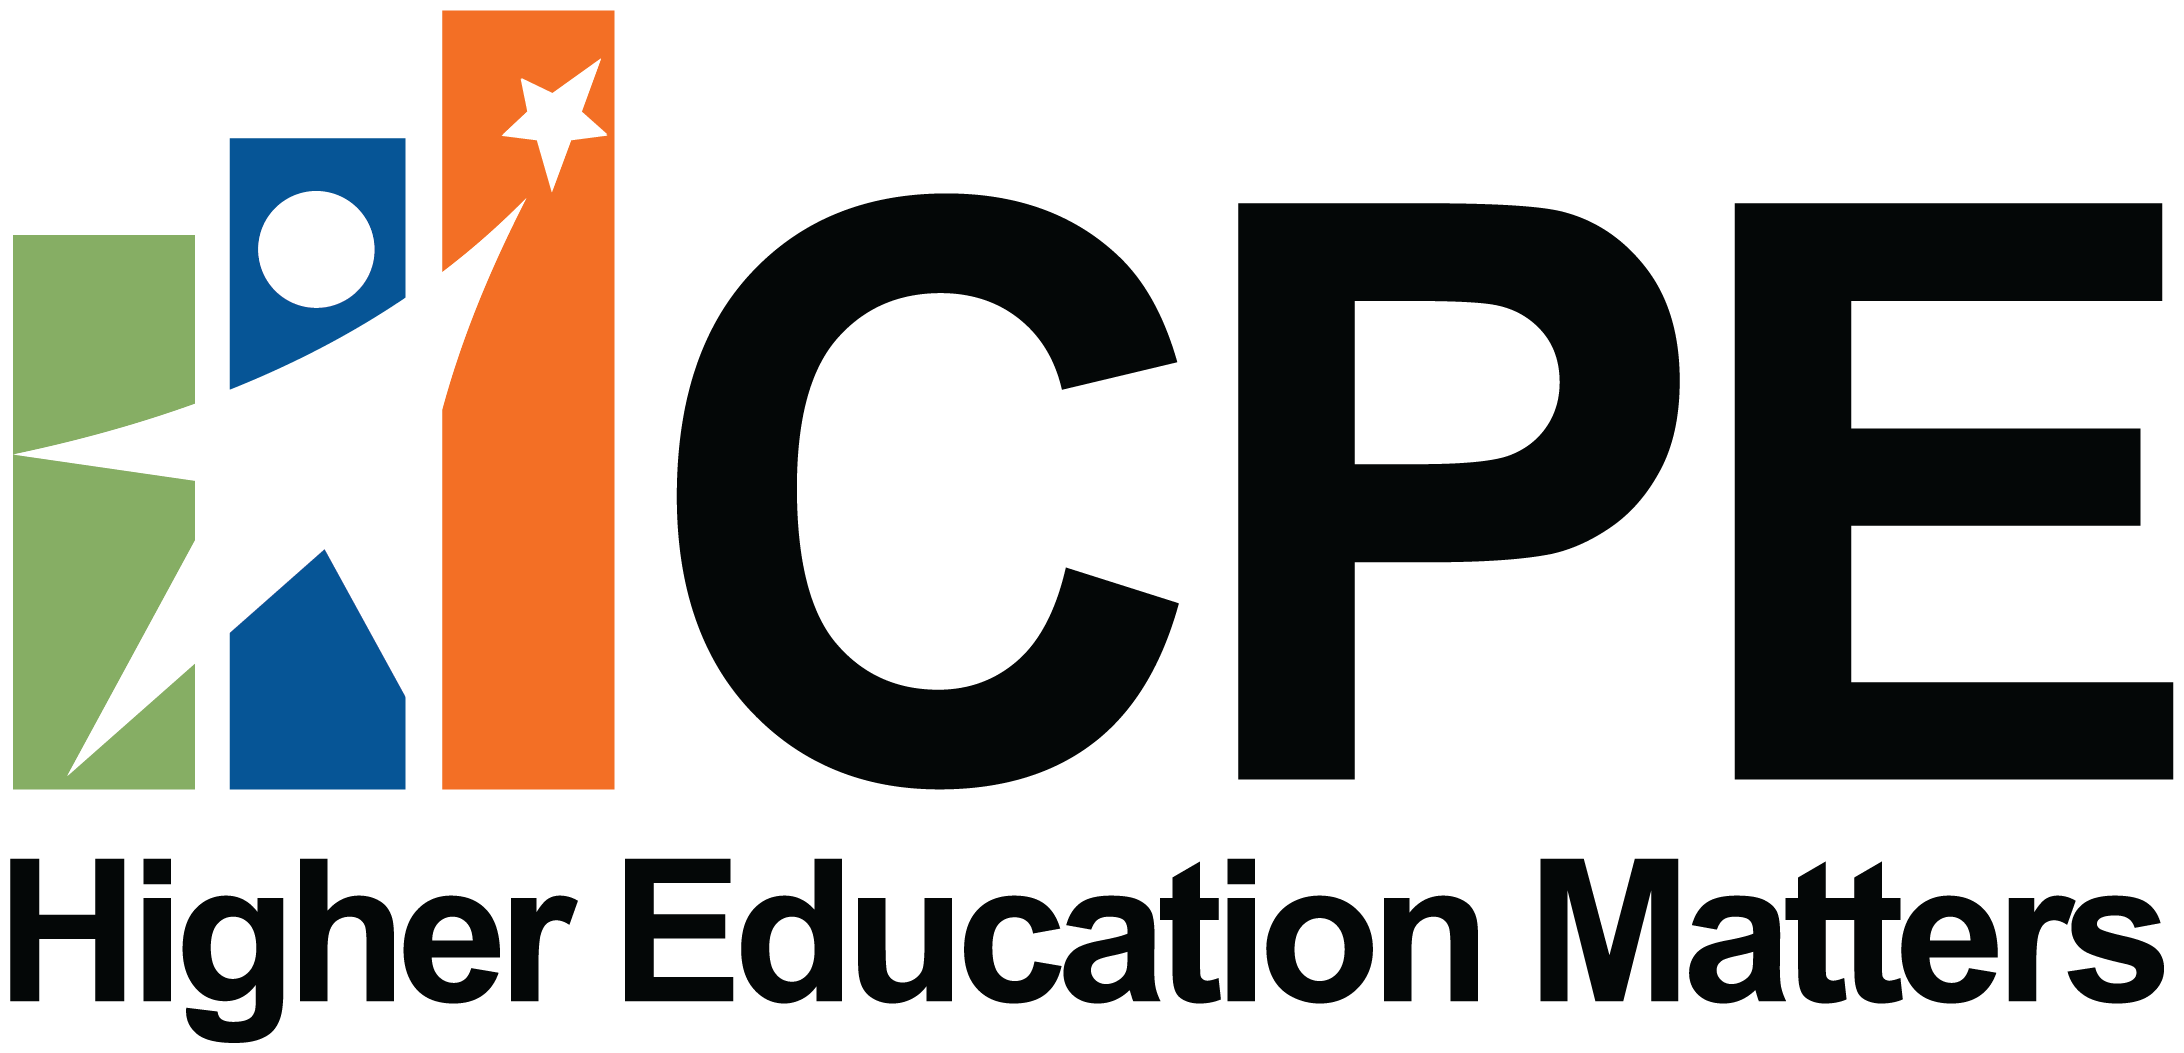 Council on Postsecondary Education (CPE) Logo link